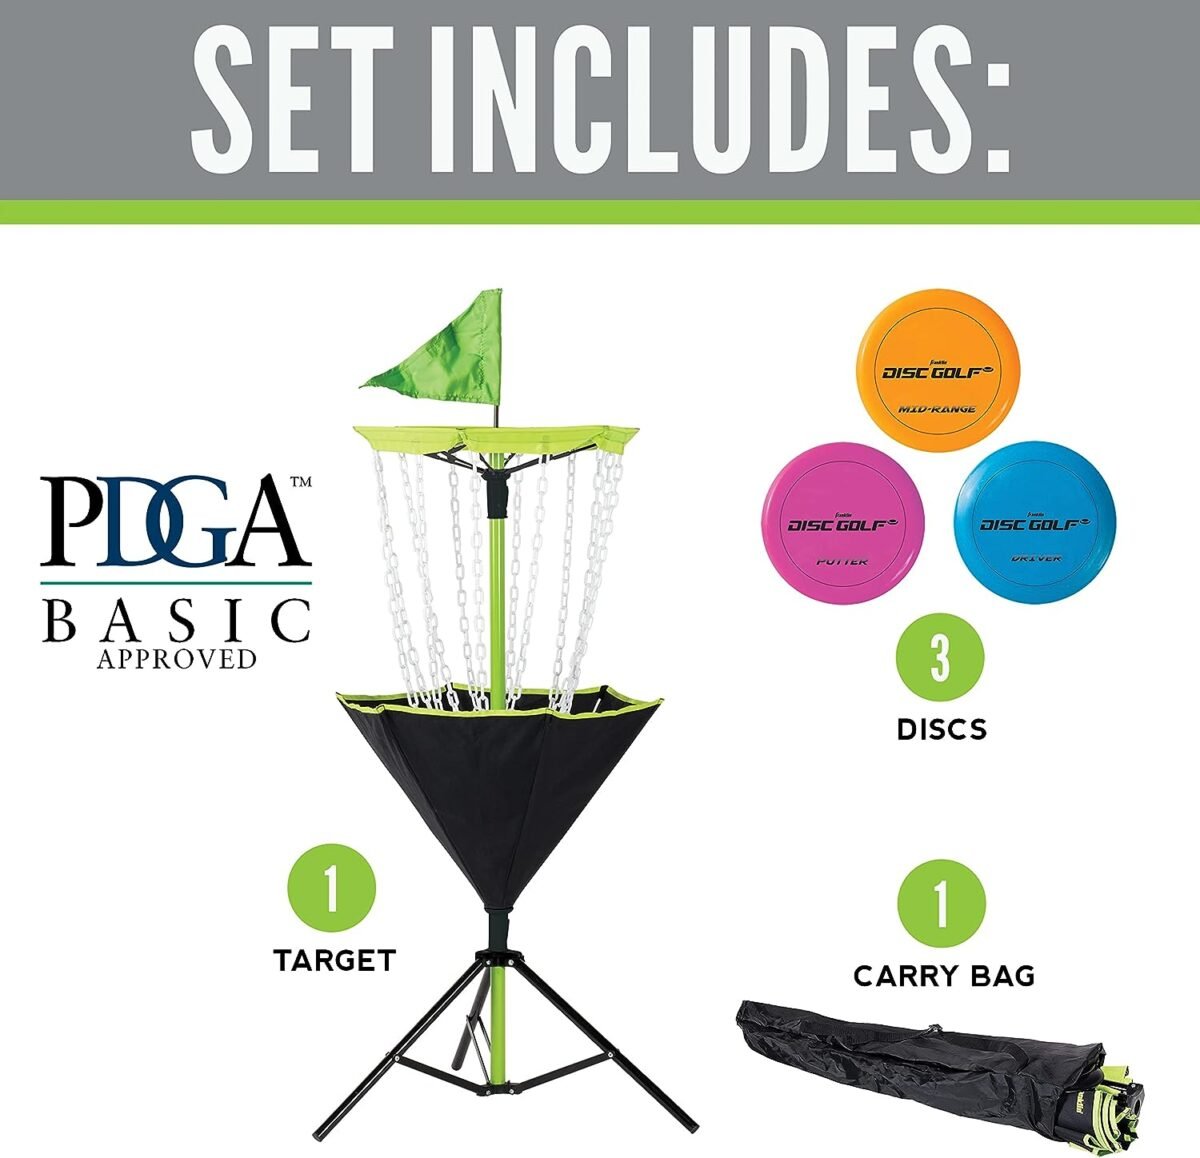 Portable Disc Golf Baskets Reviewed: A Comparison of 5 Top Picks